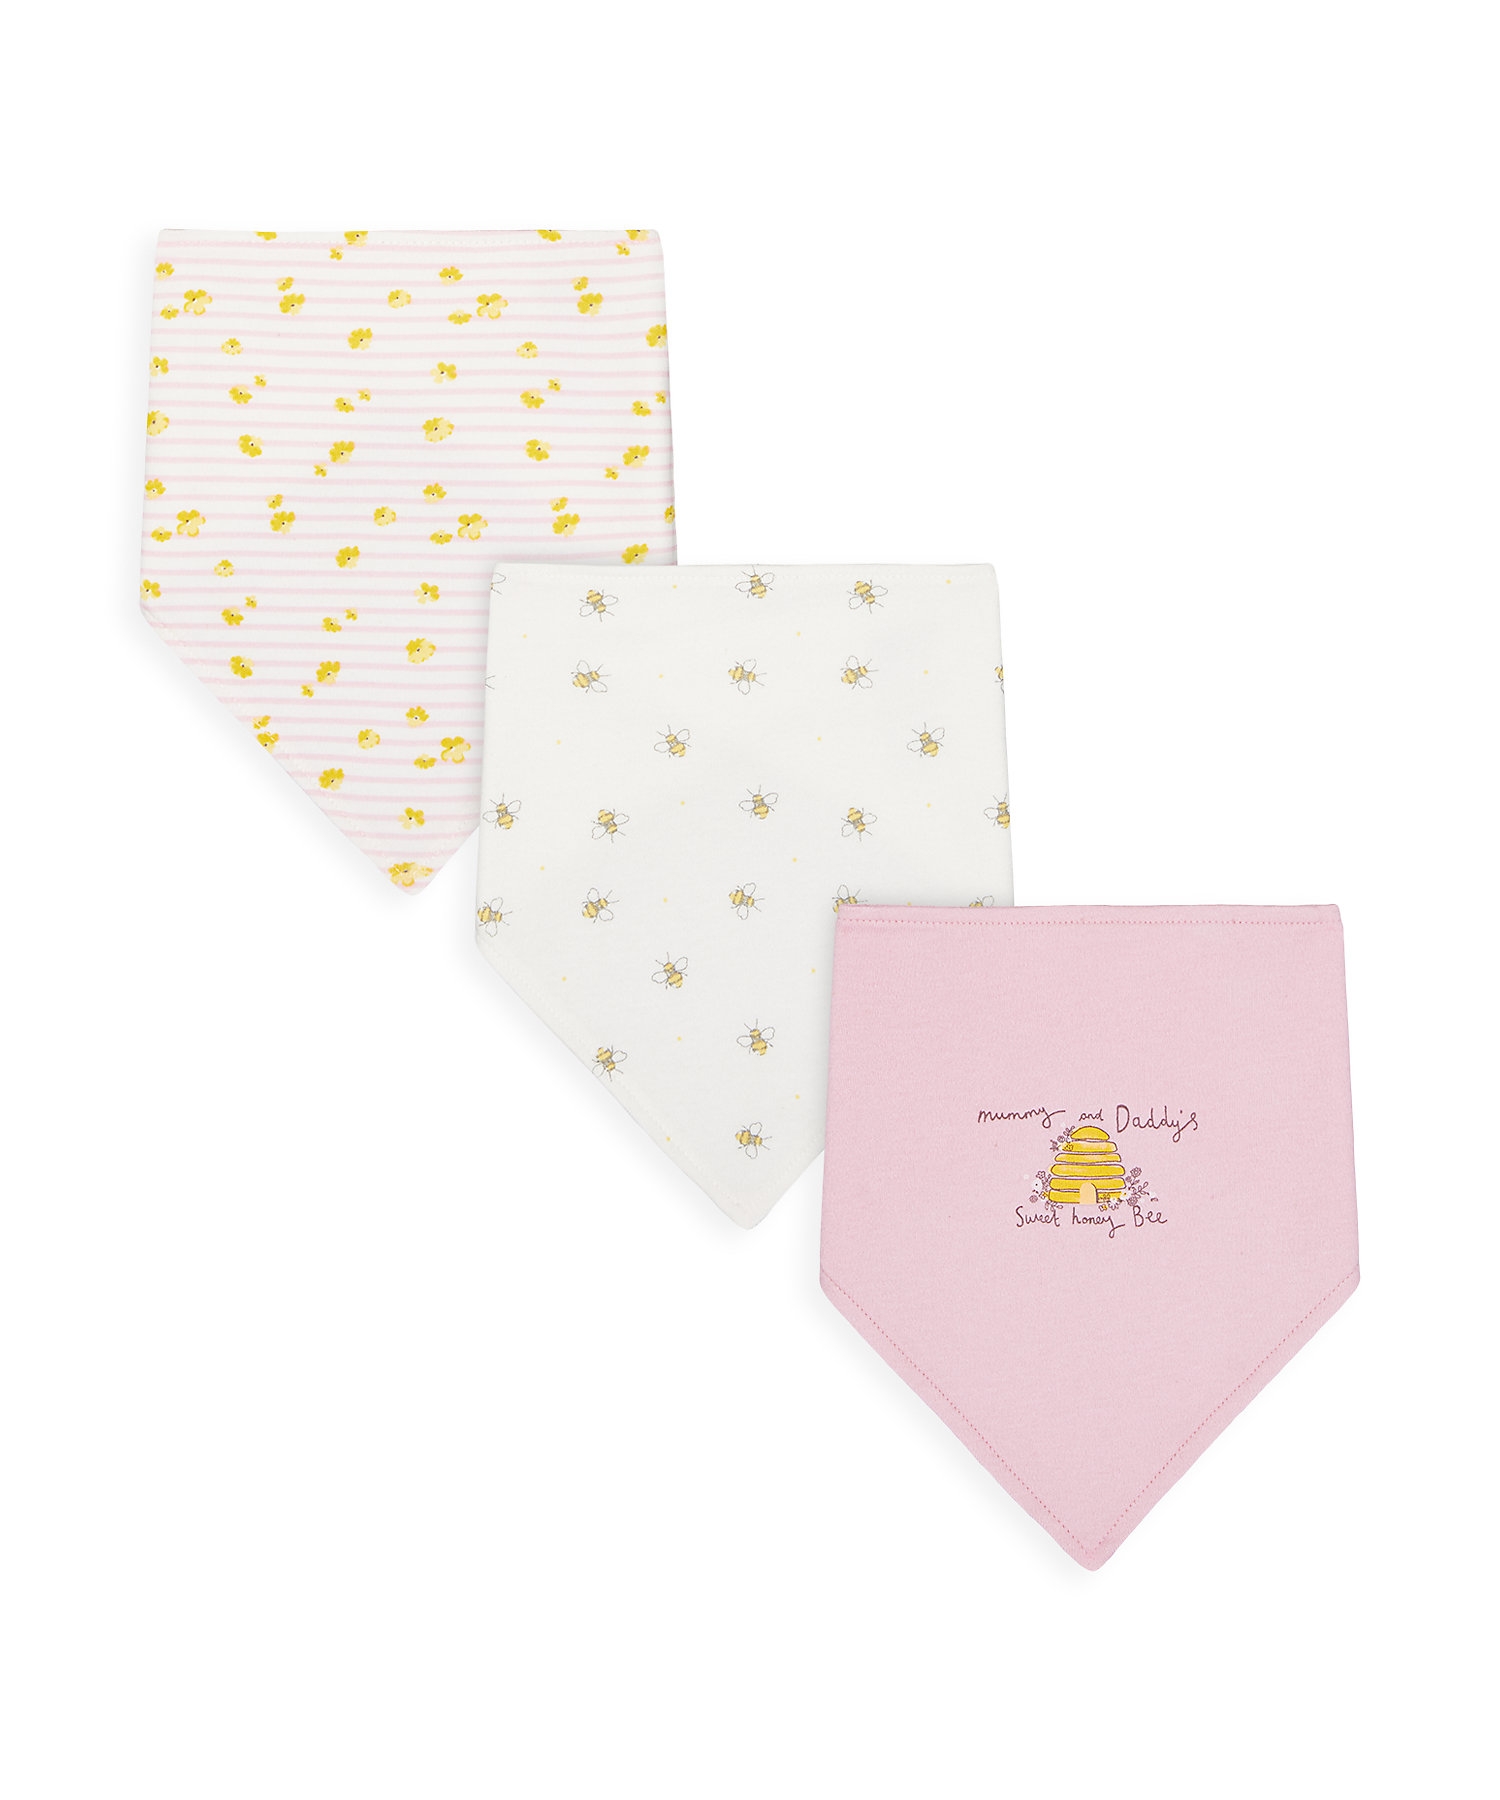 Mothercare | Girls Bibs Printed - Pack Of 3 - Multicolor 0